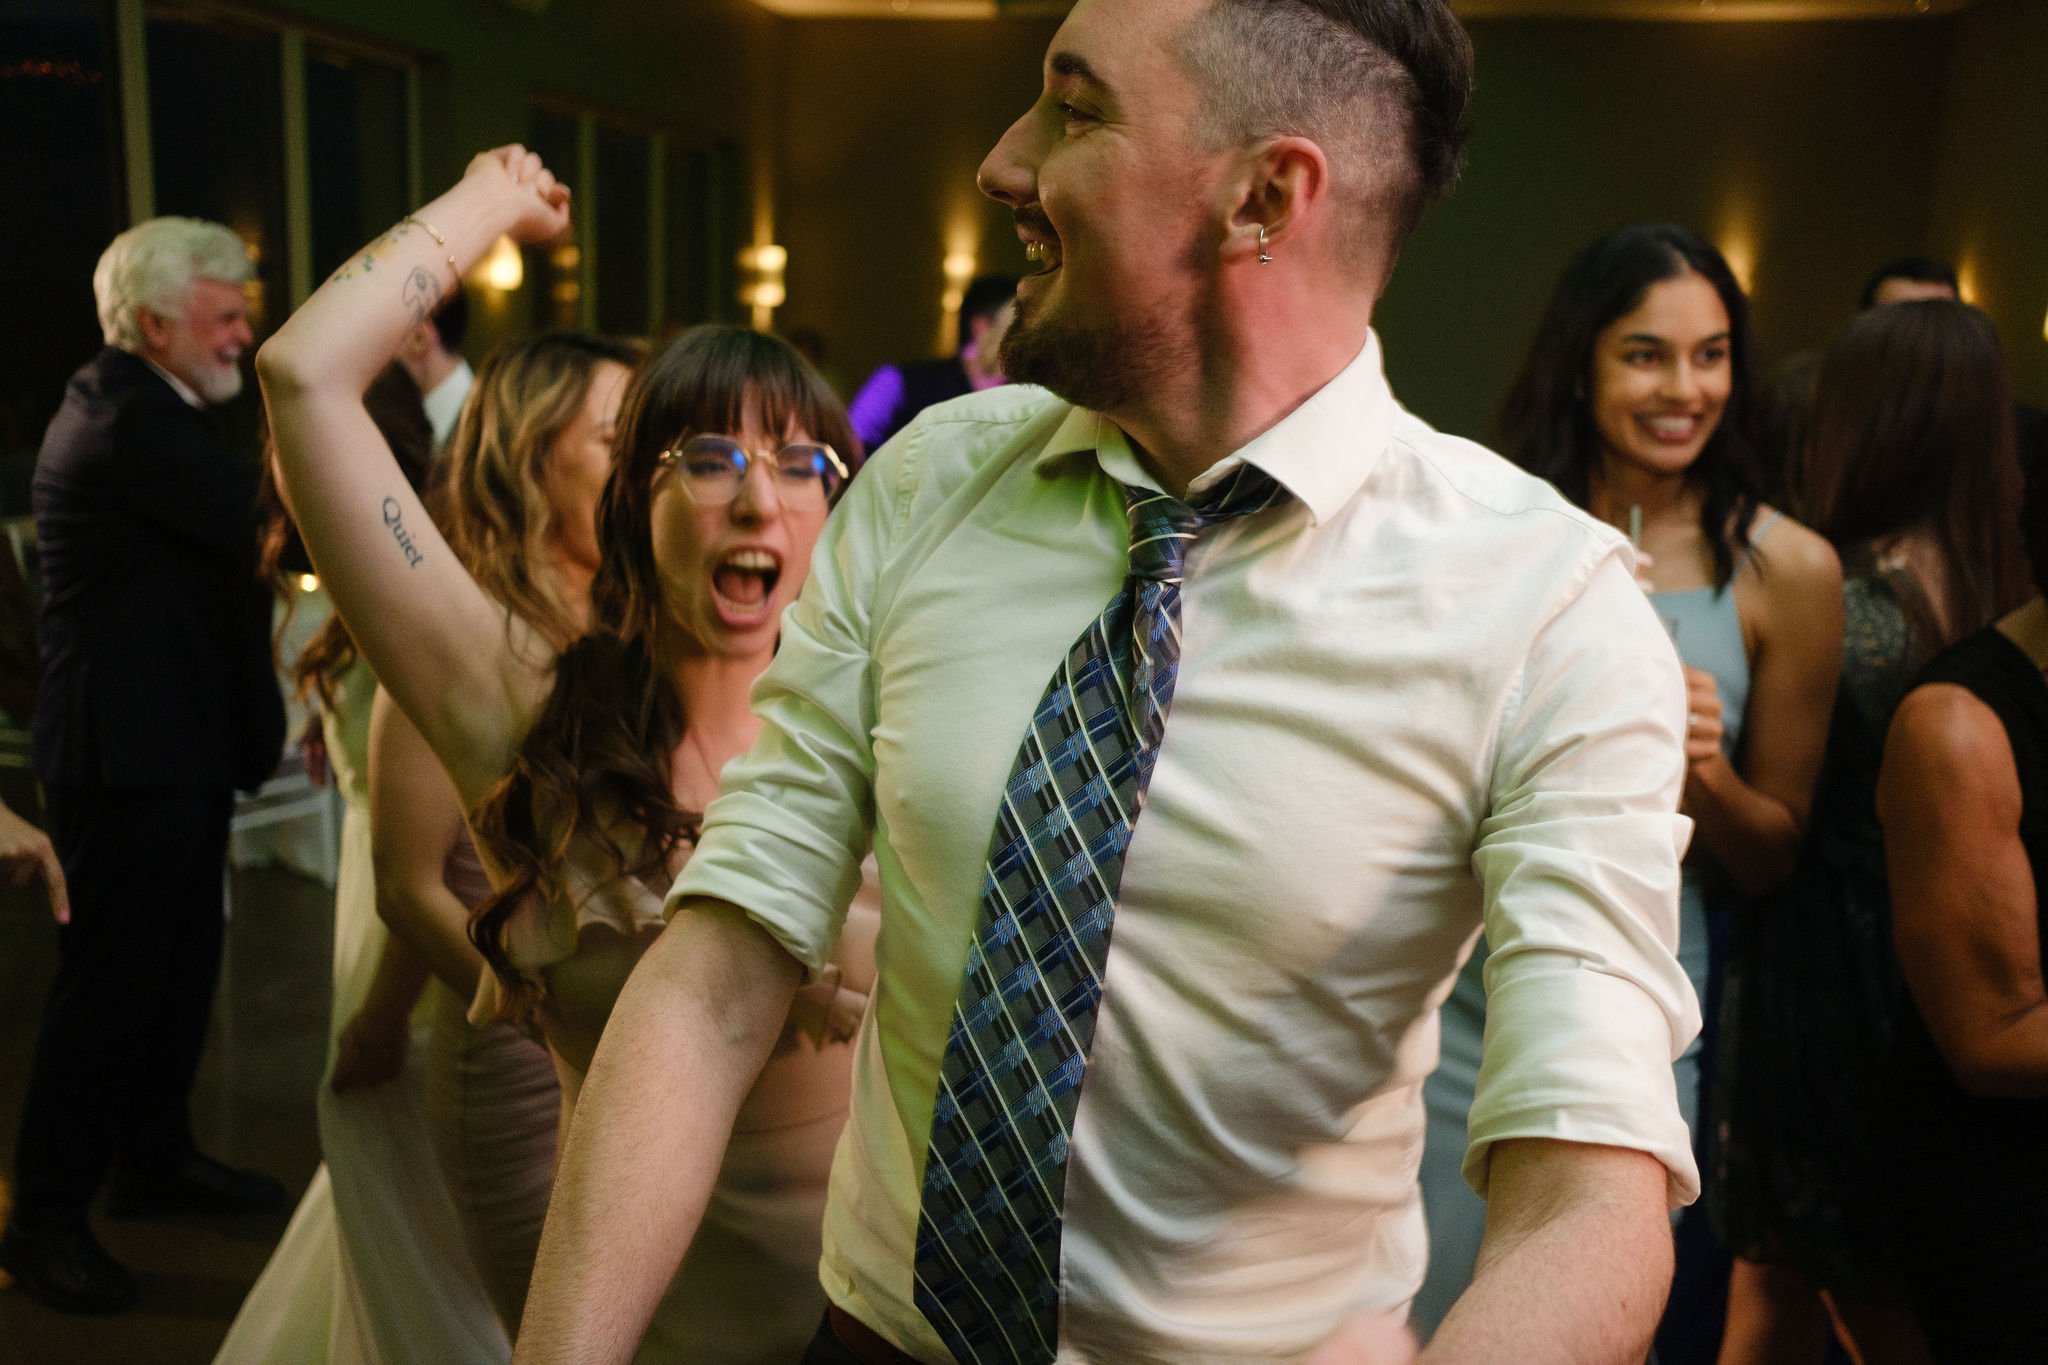  dance party at a le belvedere wedding reception 